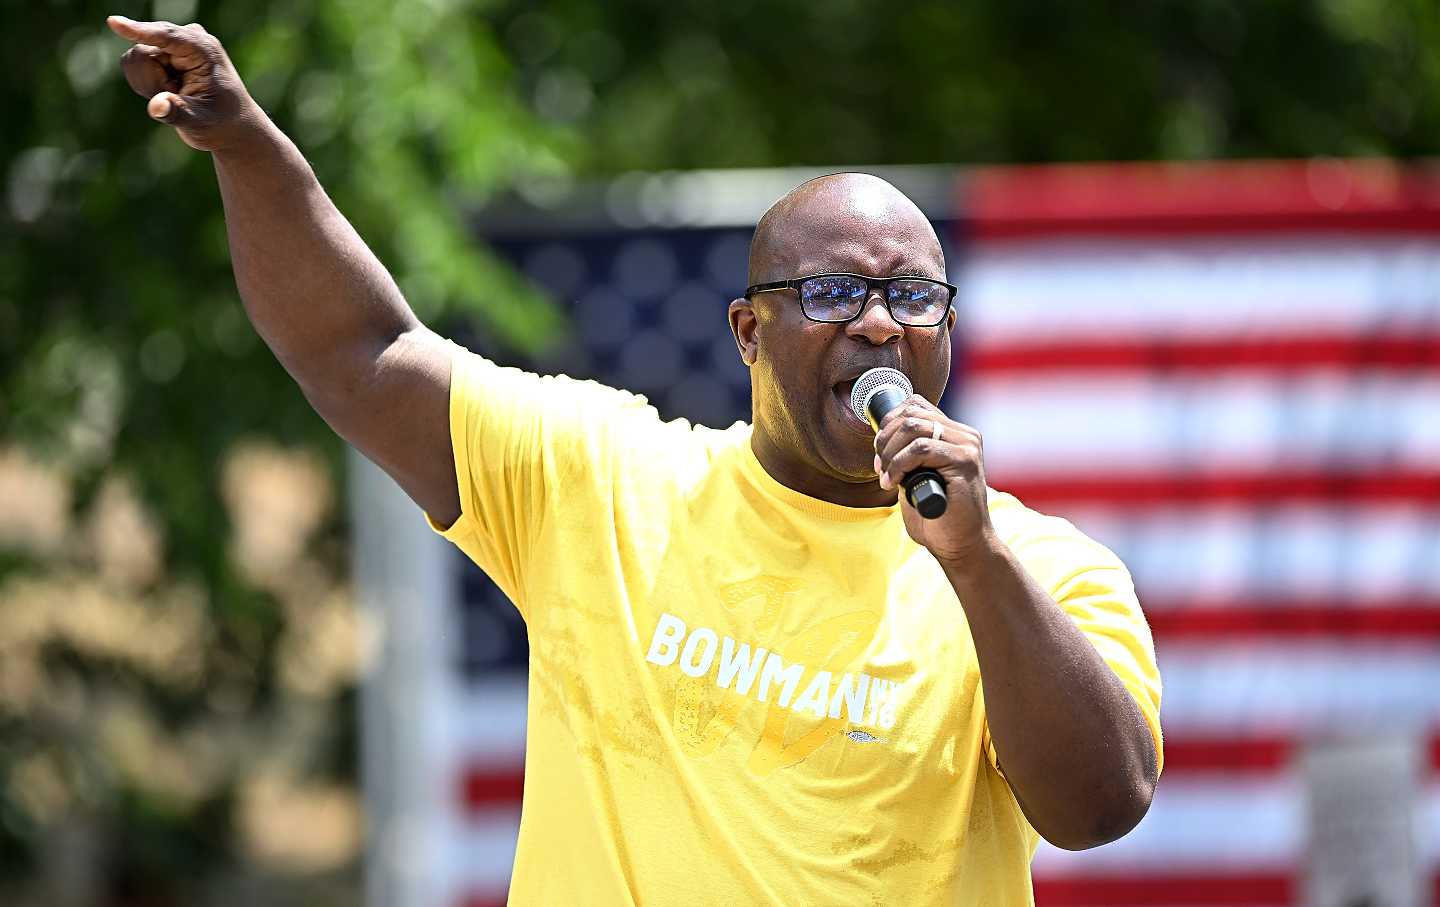 Jamaal Bowman speaks at a campaign rally at St. Mary's Park in the Bronx on June 22, 2024, in New York City.